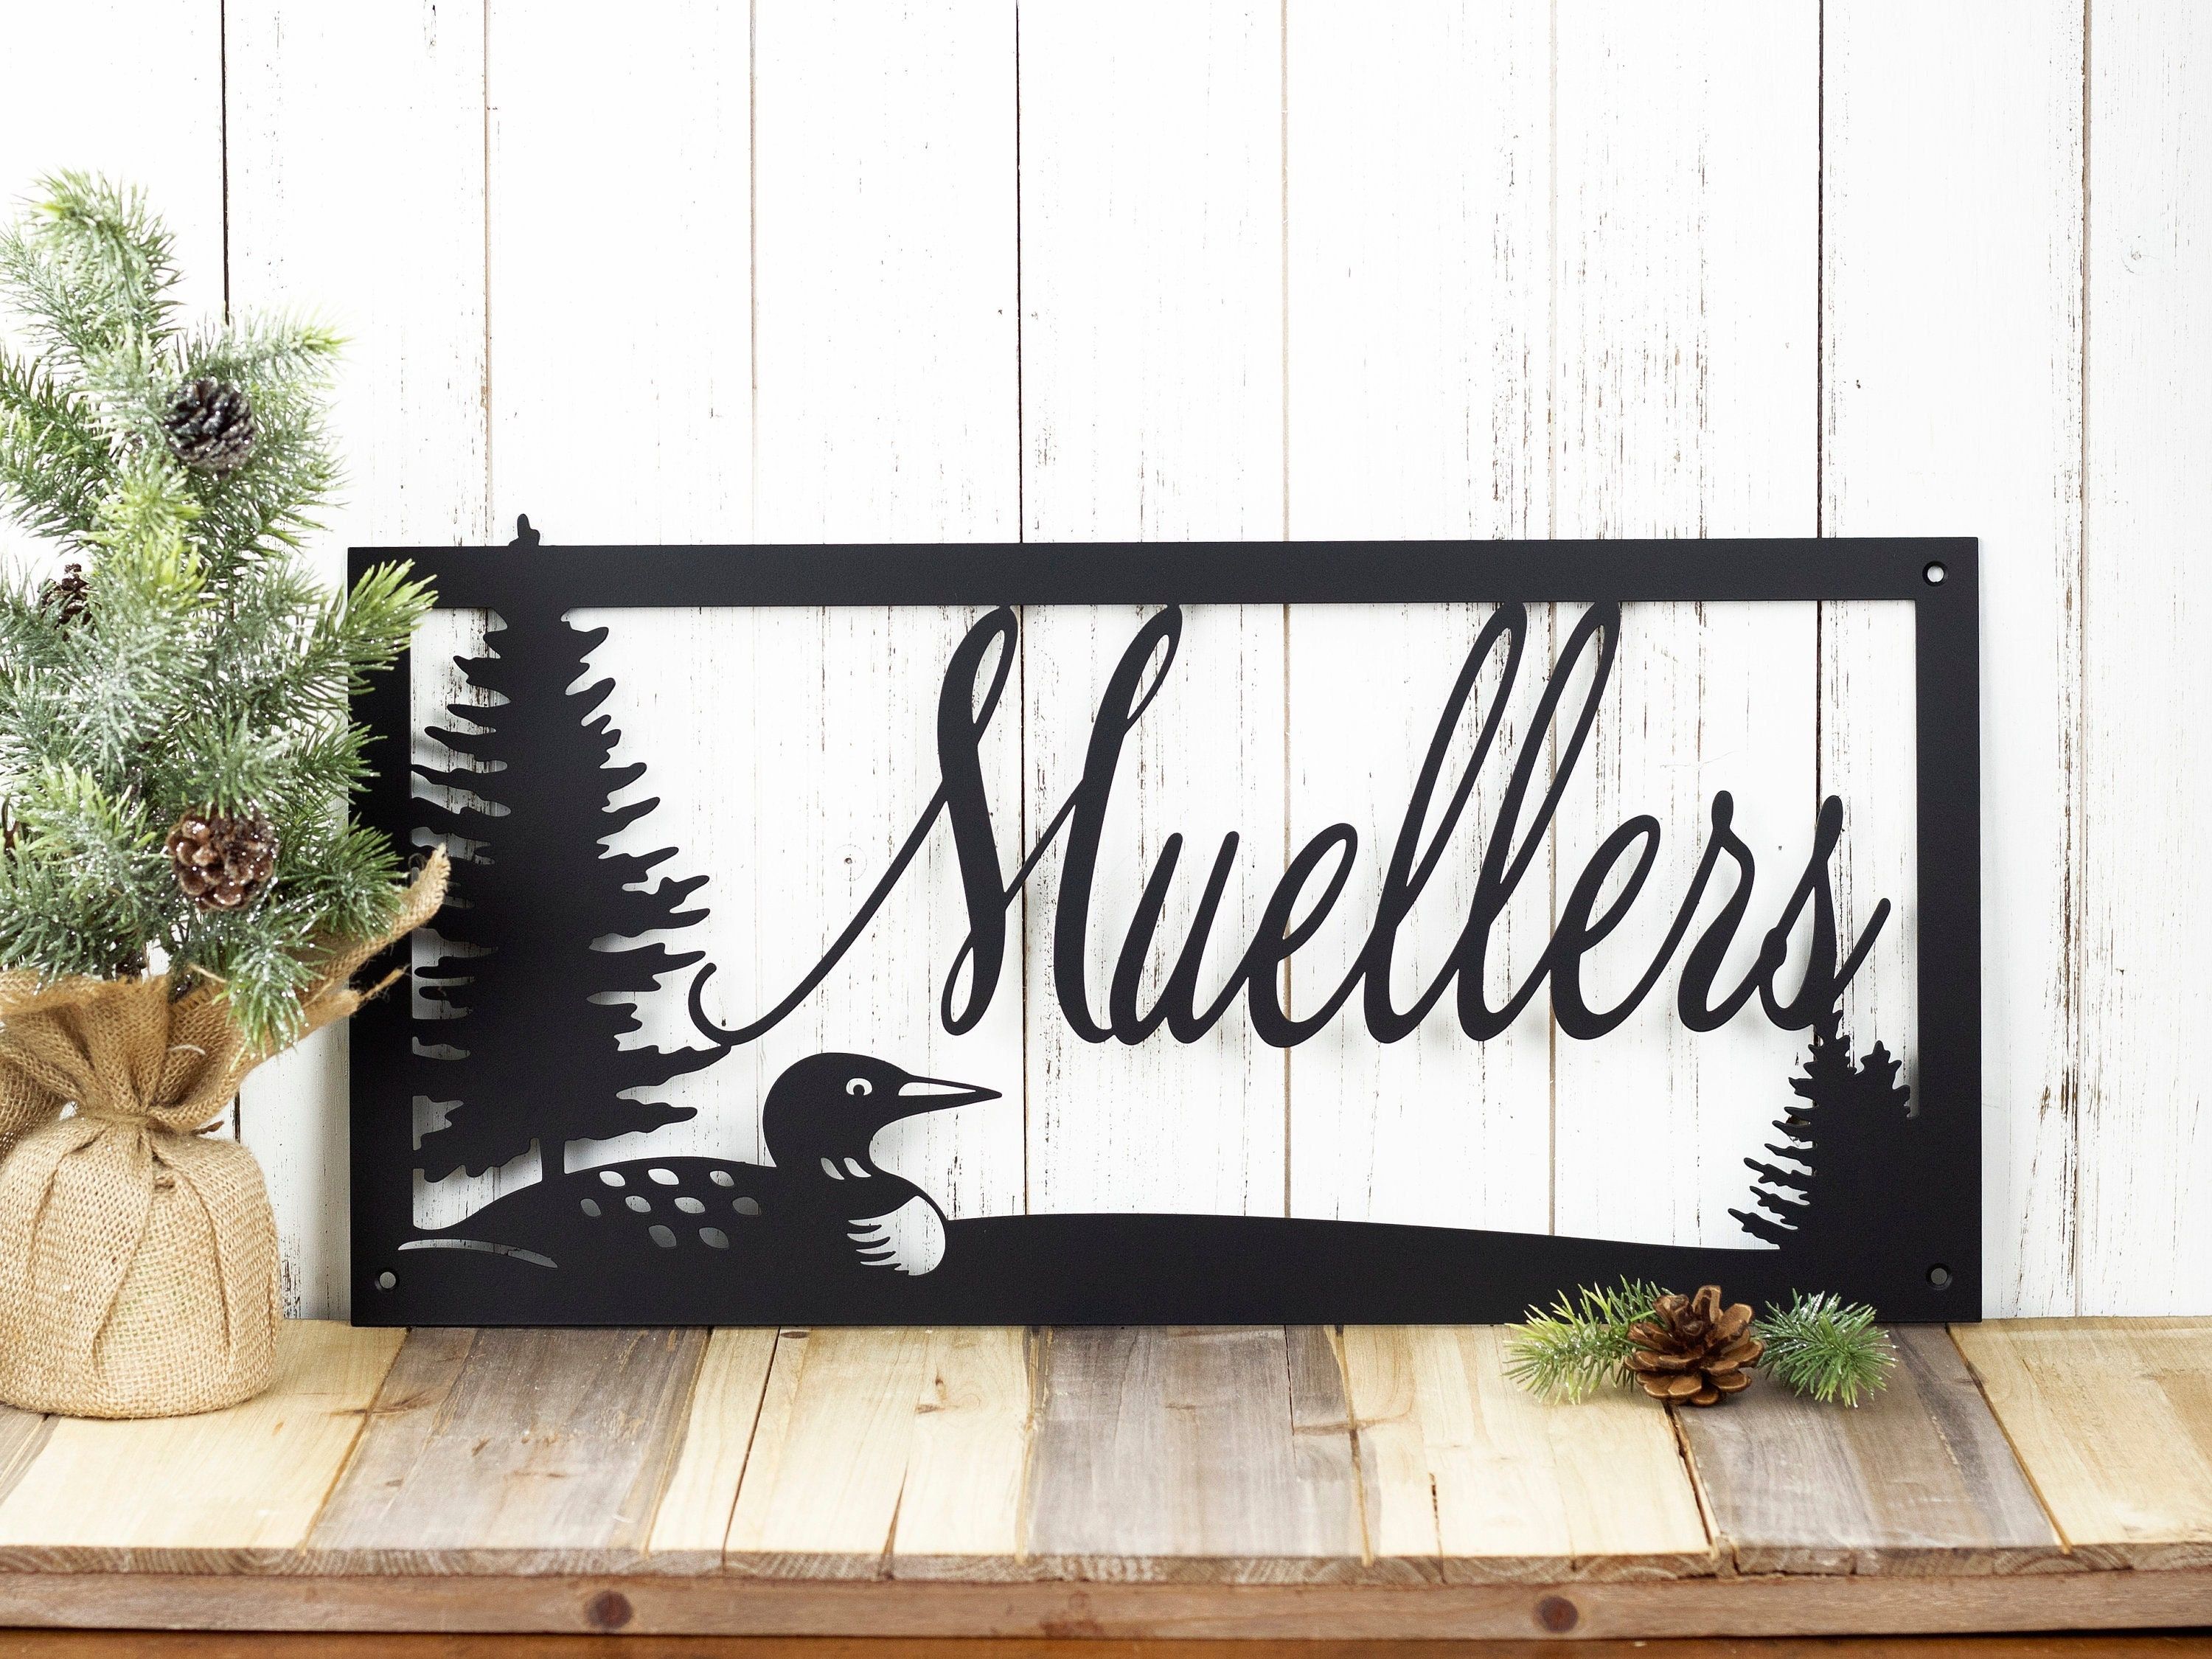 Custom Outdoor Family Last Name Metal Sign With Loon, Family Name Sign,  Custom Sign, Metal Wall Art Regarding Most Recent Family Wall Sign Metal (Gallery 19 of 20)